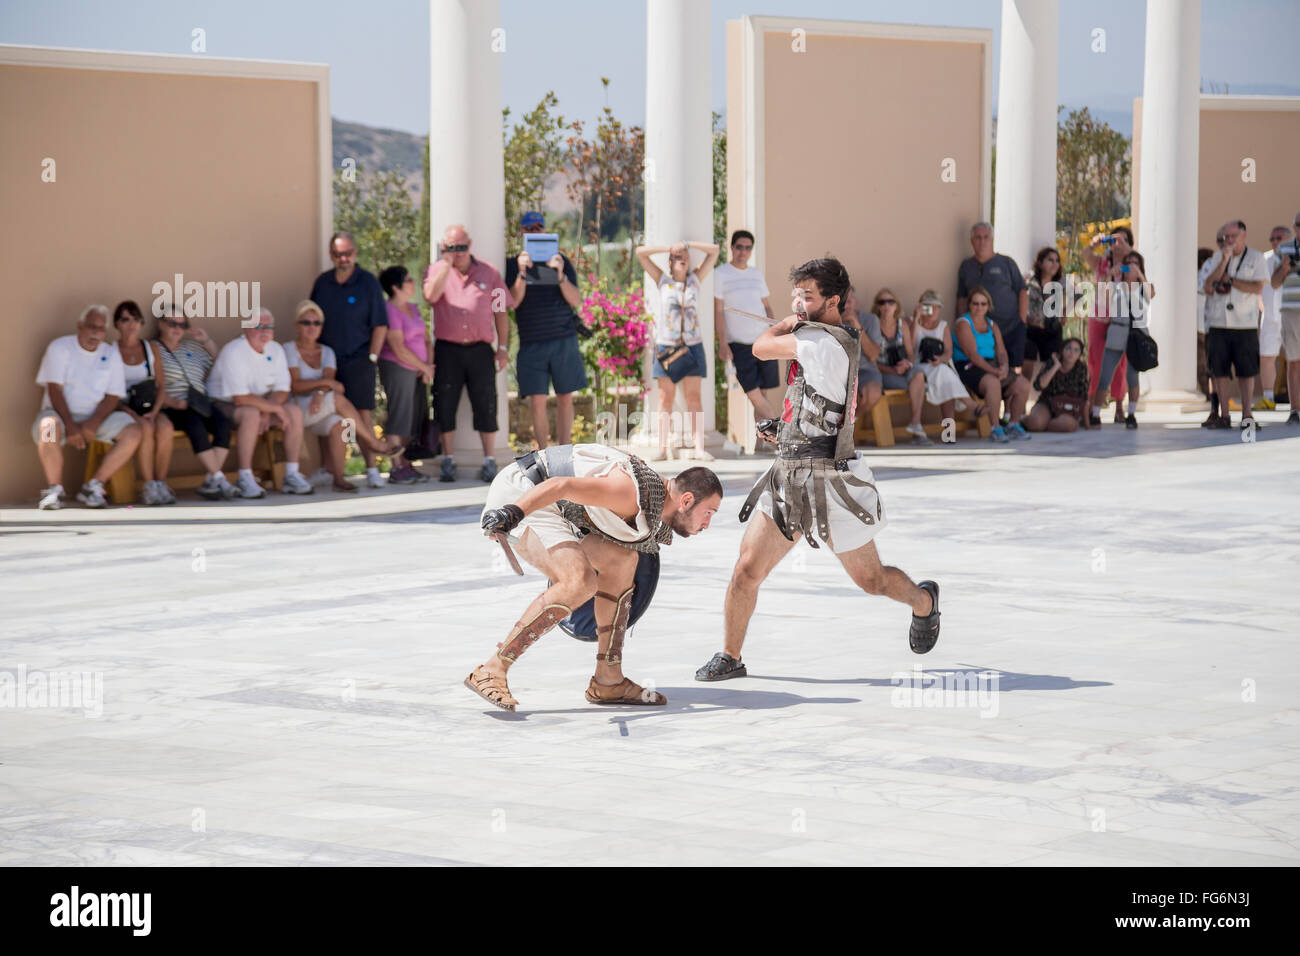 A pair of actors dressed as gladiators fight in a duel in front of a crowd of tourists at a Greek history attraction in Turkey Stock Photo